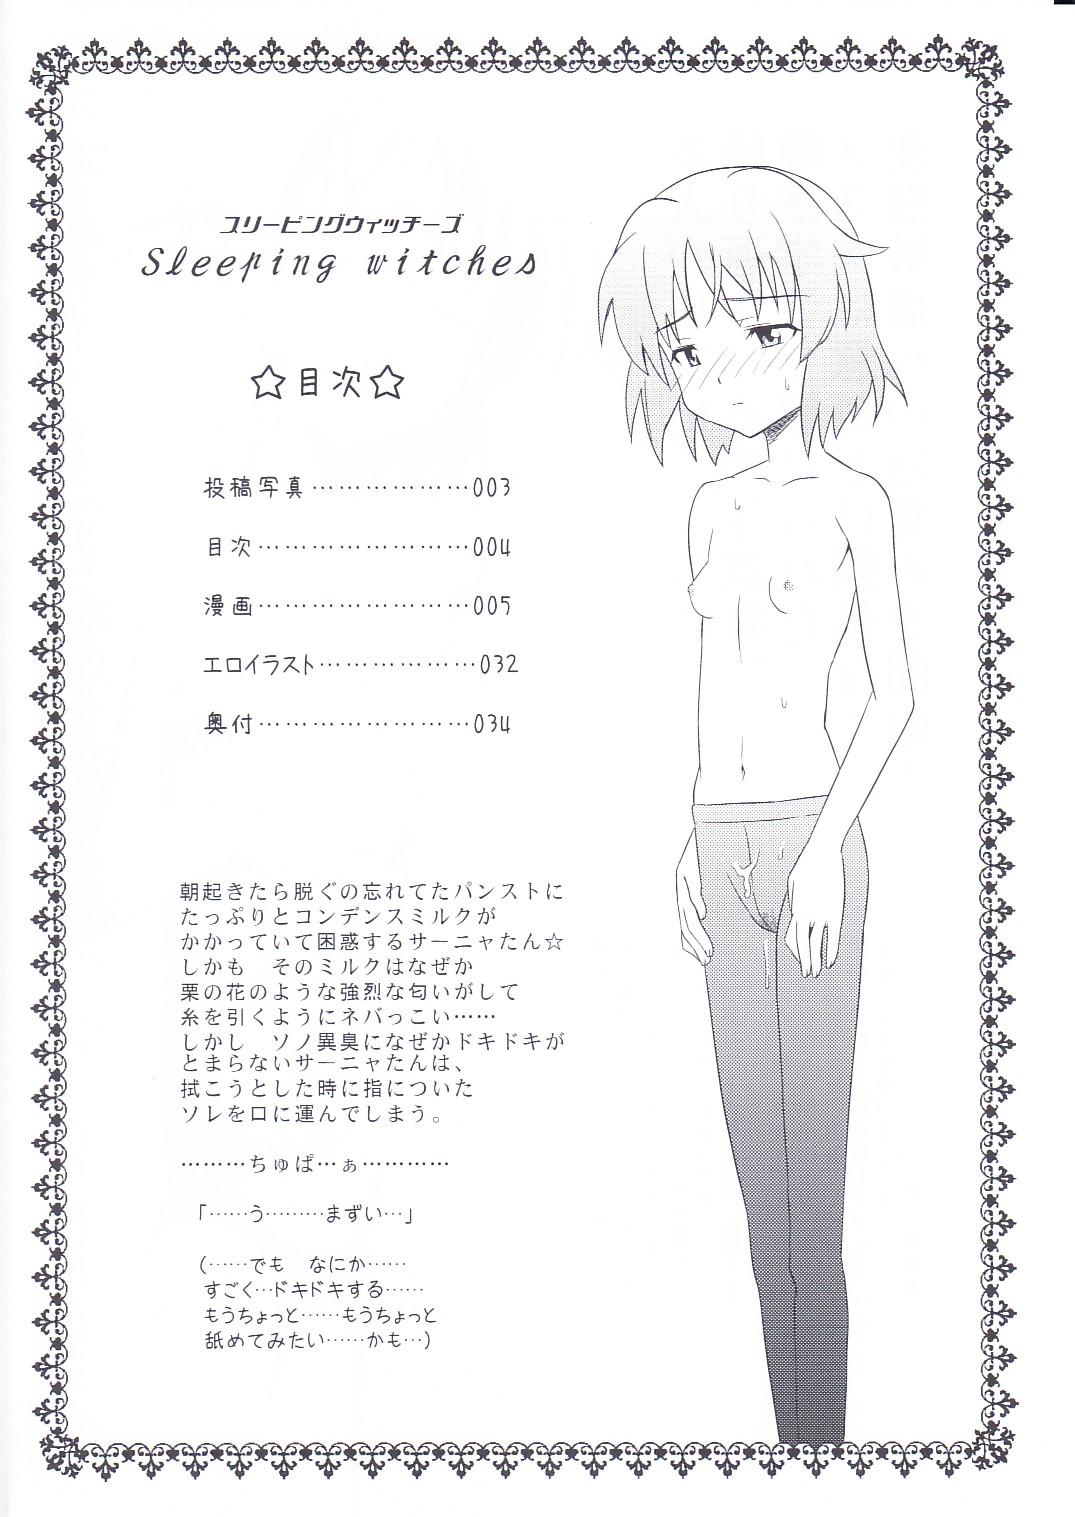 18yearsold Sleeping witches - Strike witches Pussysex - Page 3